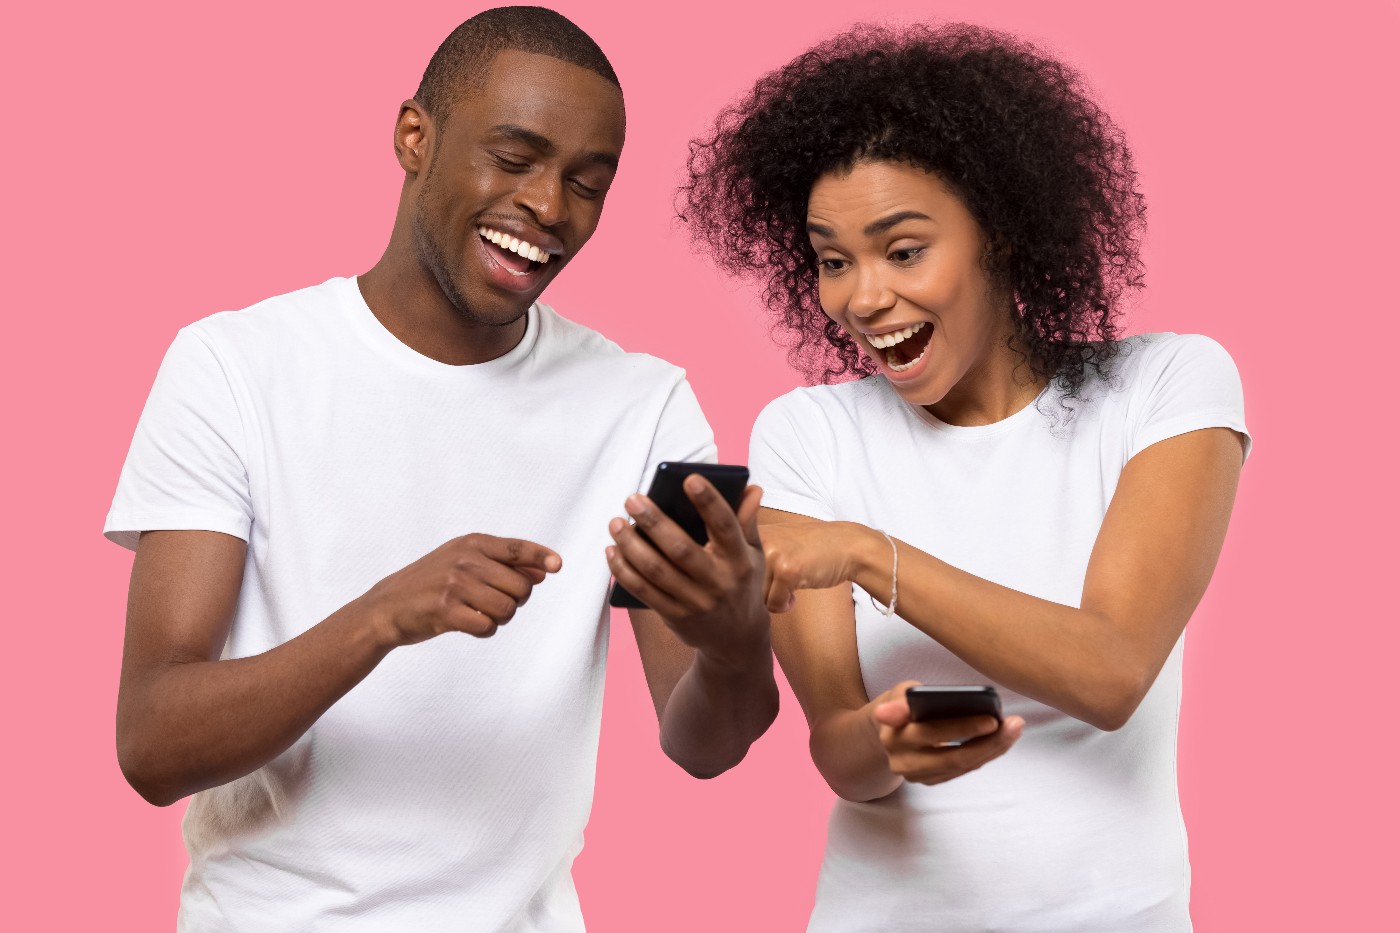 https://tickertapecdn.tdameritrade.com/assets/images/pages/md/couple looking at cellphone with surprised look: candlesticks and options